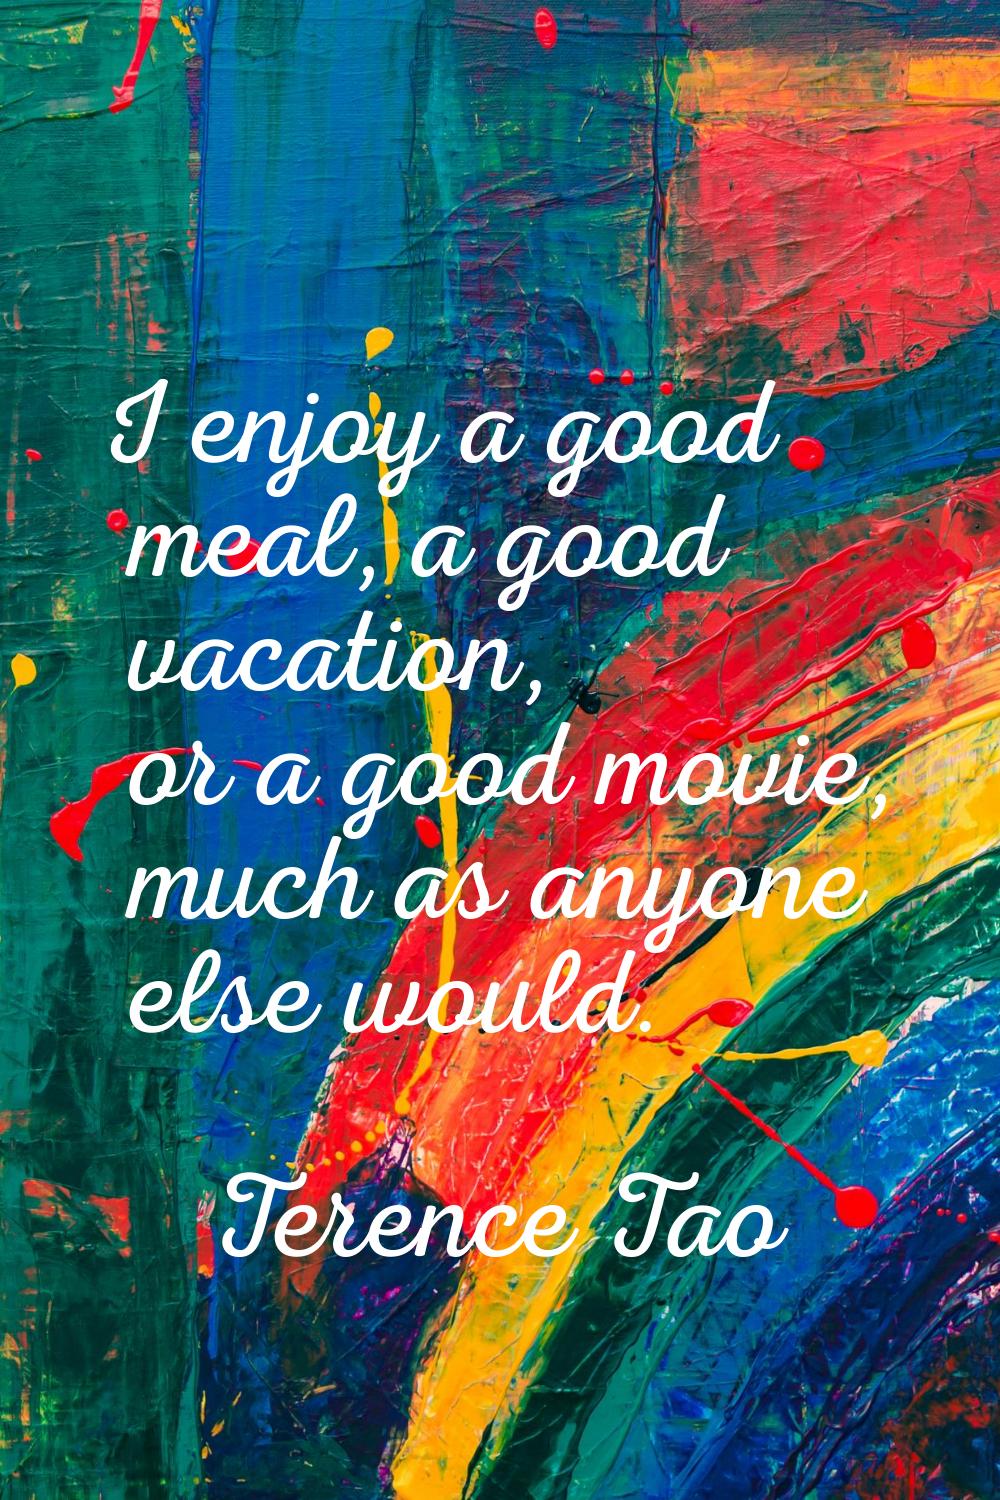 I enjoy a good meal, a good vacation, or a good movie, much as anyone else would.